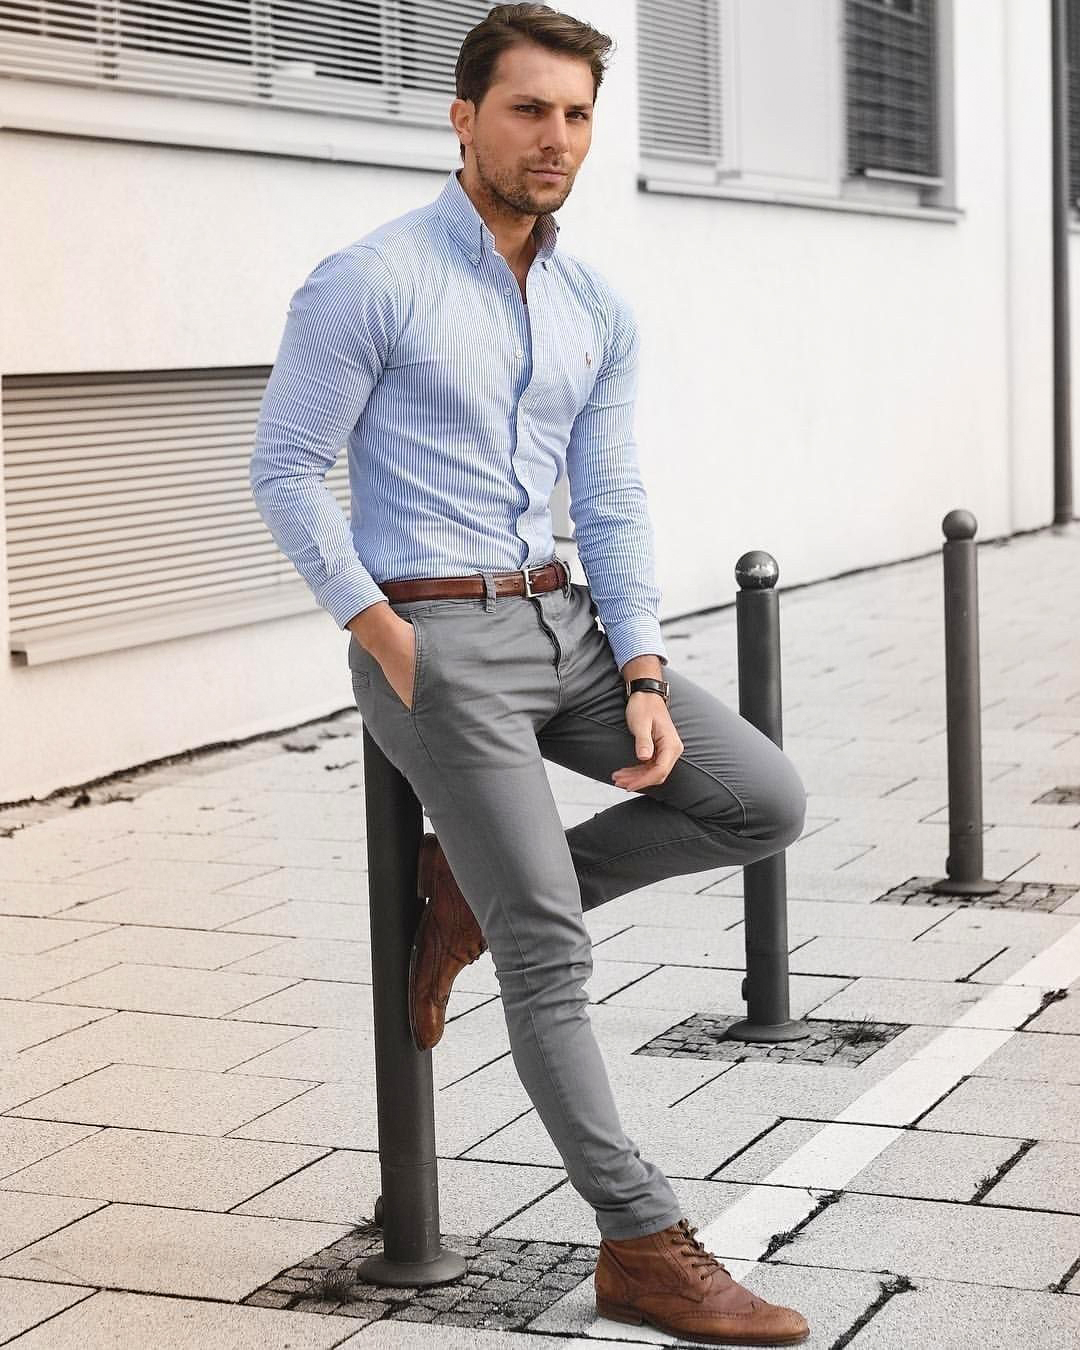 wearing light-blue shirt, brown shoes, and grey pants